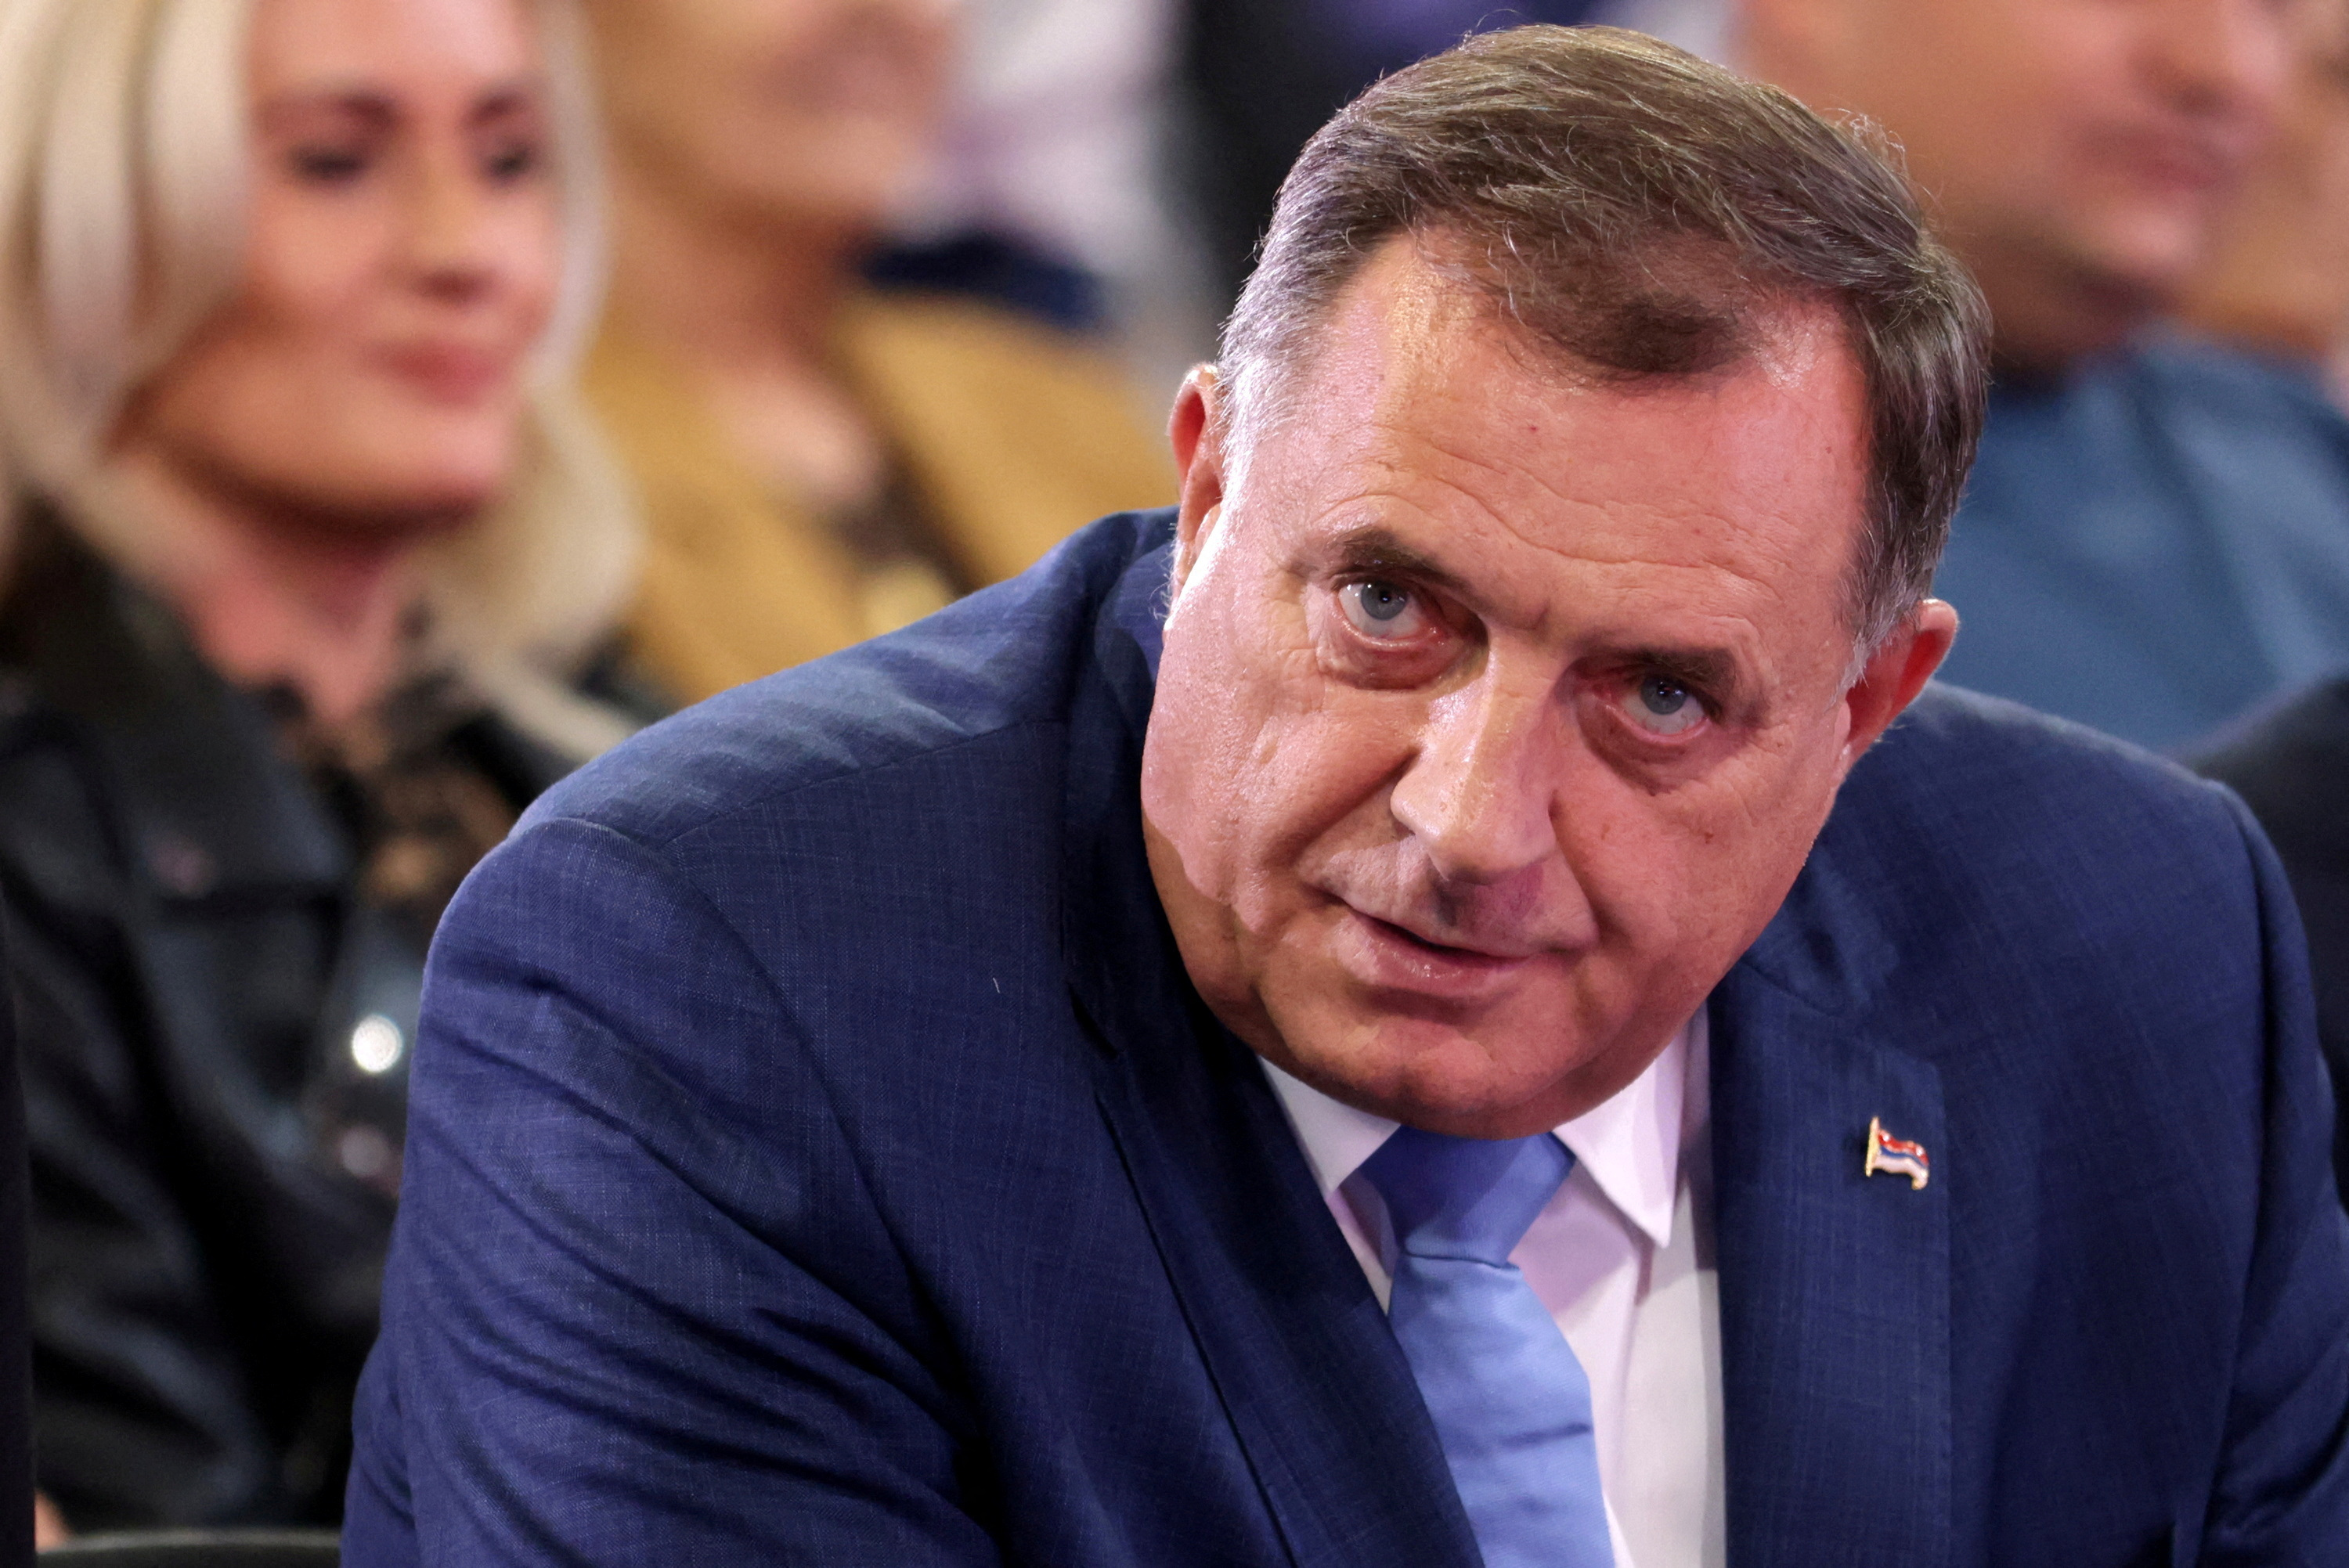 Serb candidate for President of Republika Srpska Milorad Dodik of the Alliance of Independent Social Democrats (SNSD) attends a pre-election rally in Gradiska